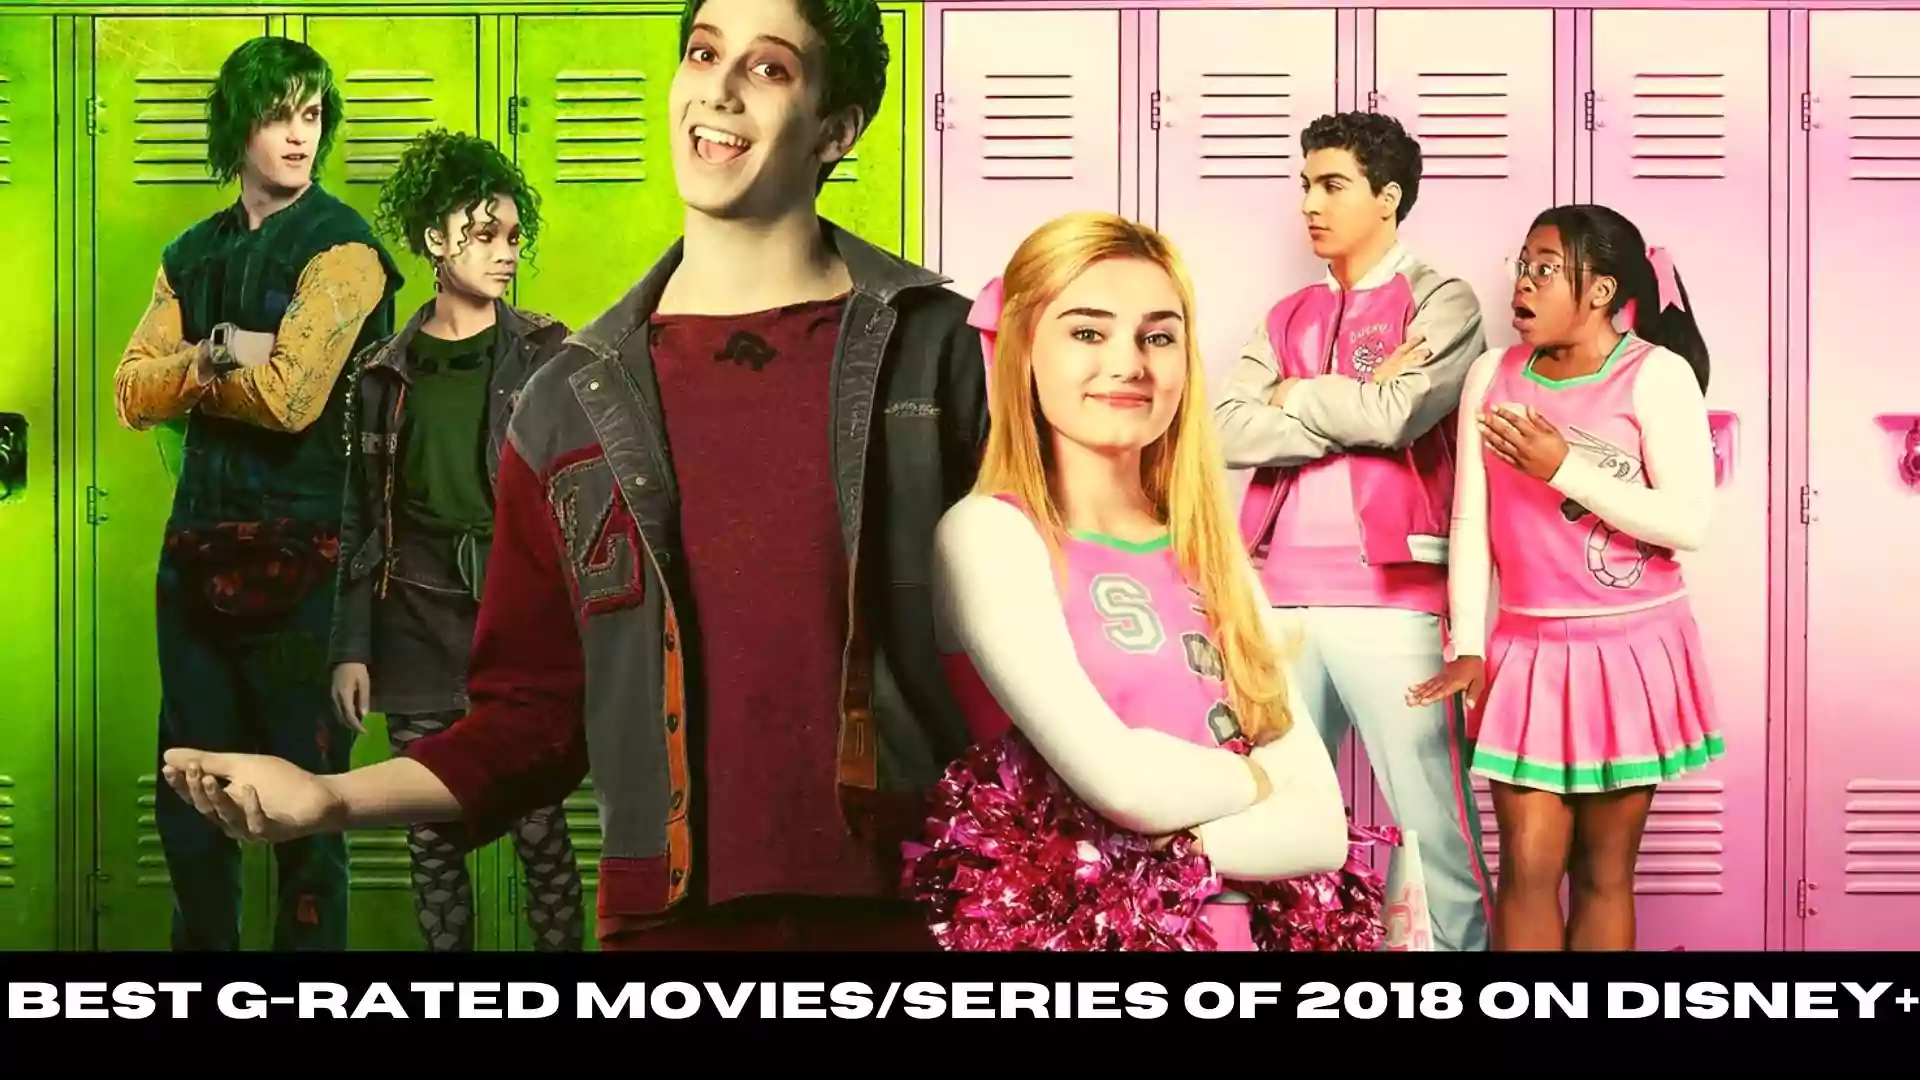 Best G-Rated Movies/series of 2018 on Disney+